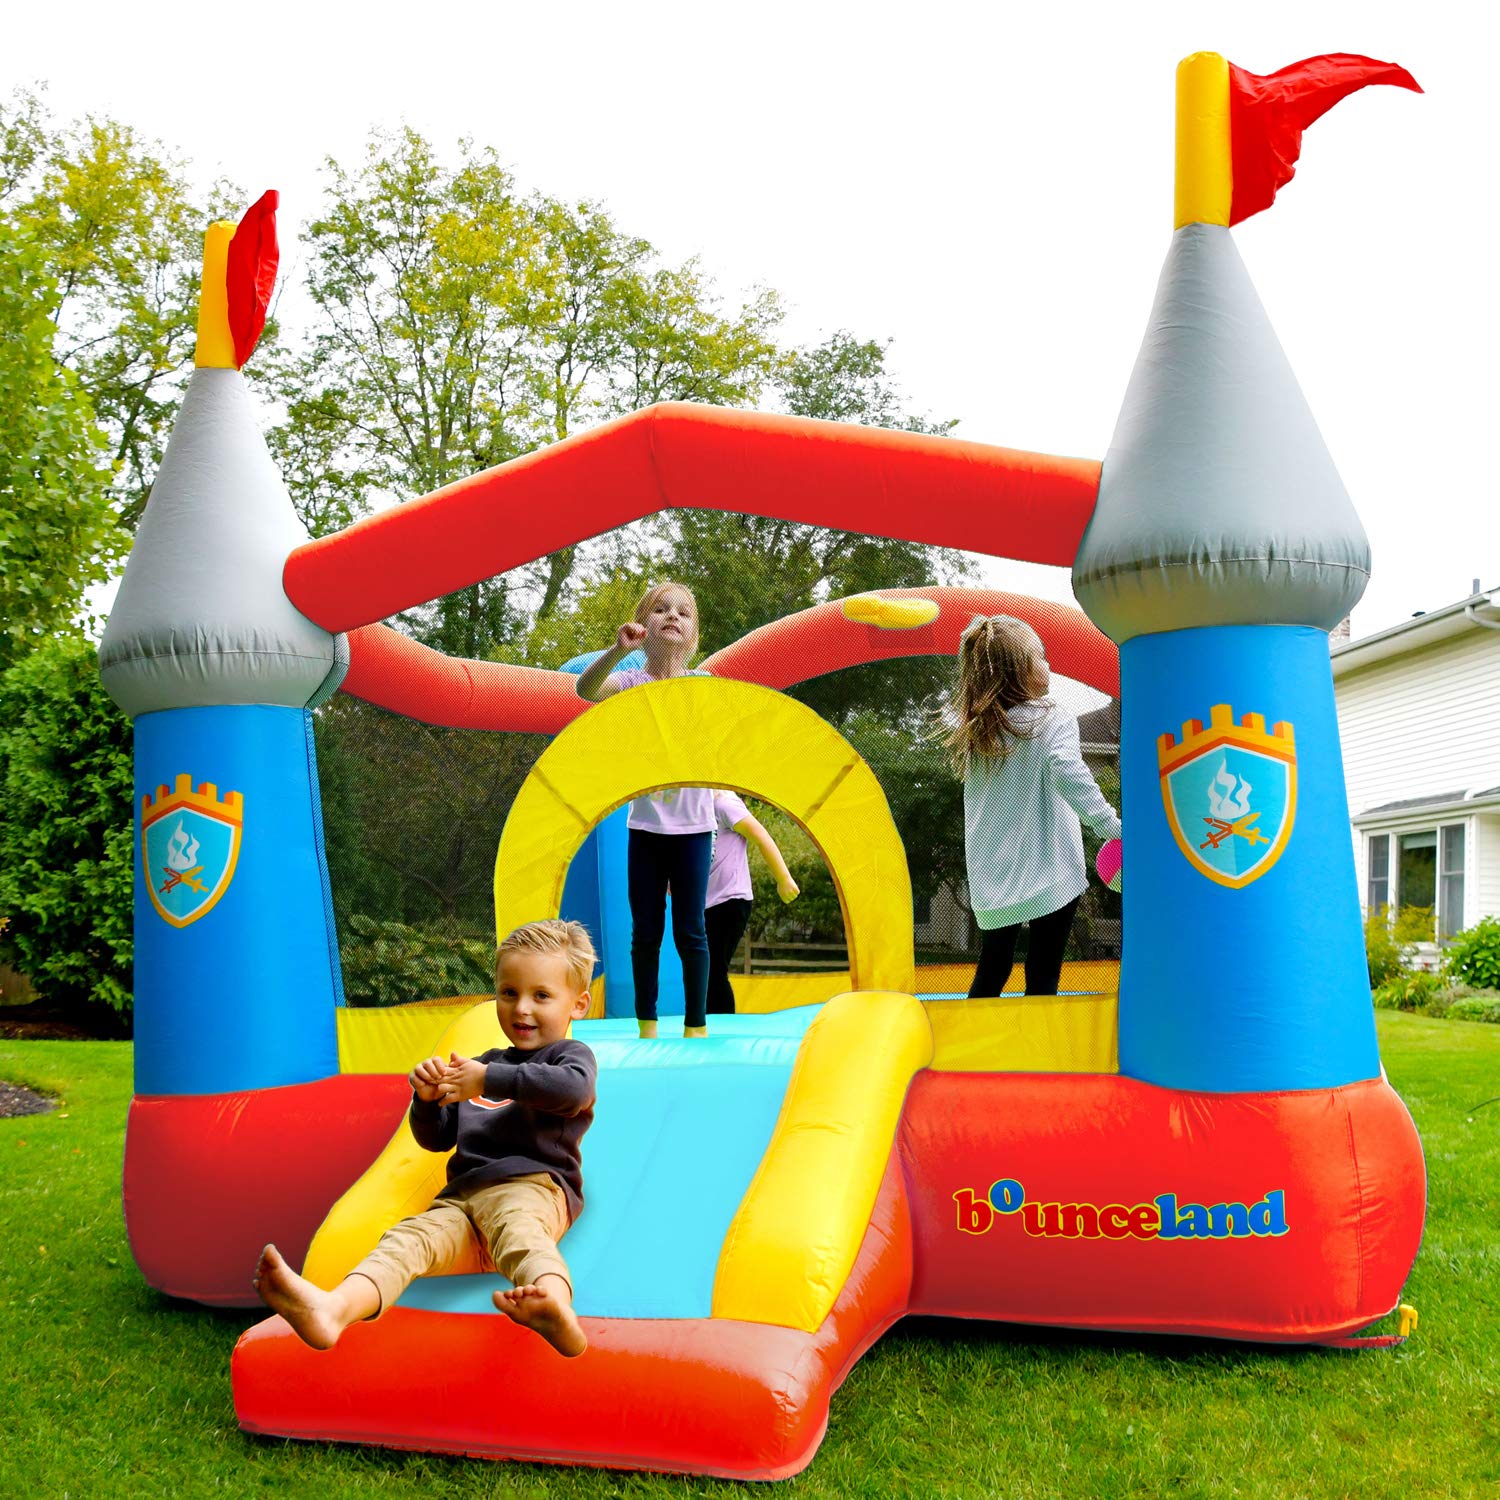 Bounceland Bounce House Castle with Basketball Hoop Inflatable Bouncer, Fun Slide, Safe Entrance Opening, UL Certified Strong Blower Included, 12 ft x 9 ft x 7 ft H